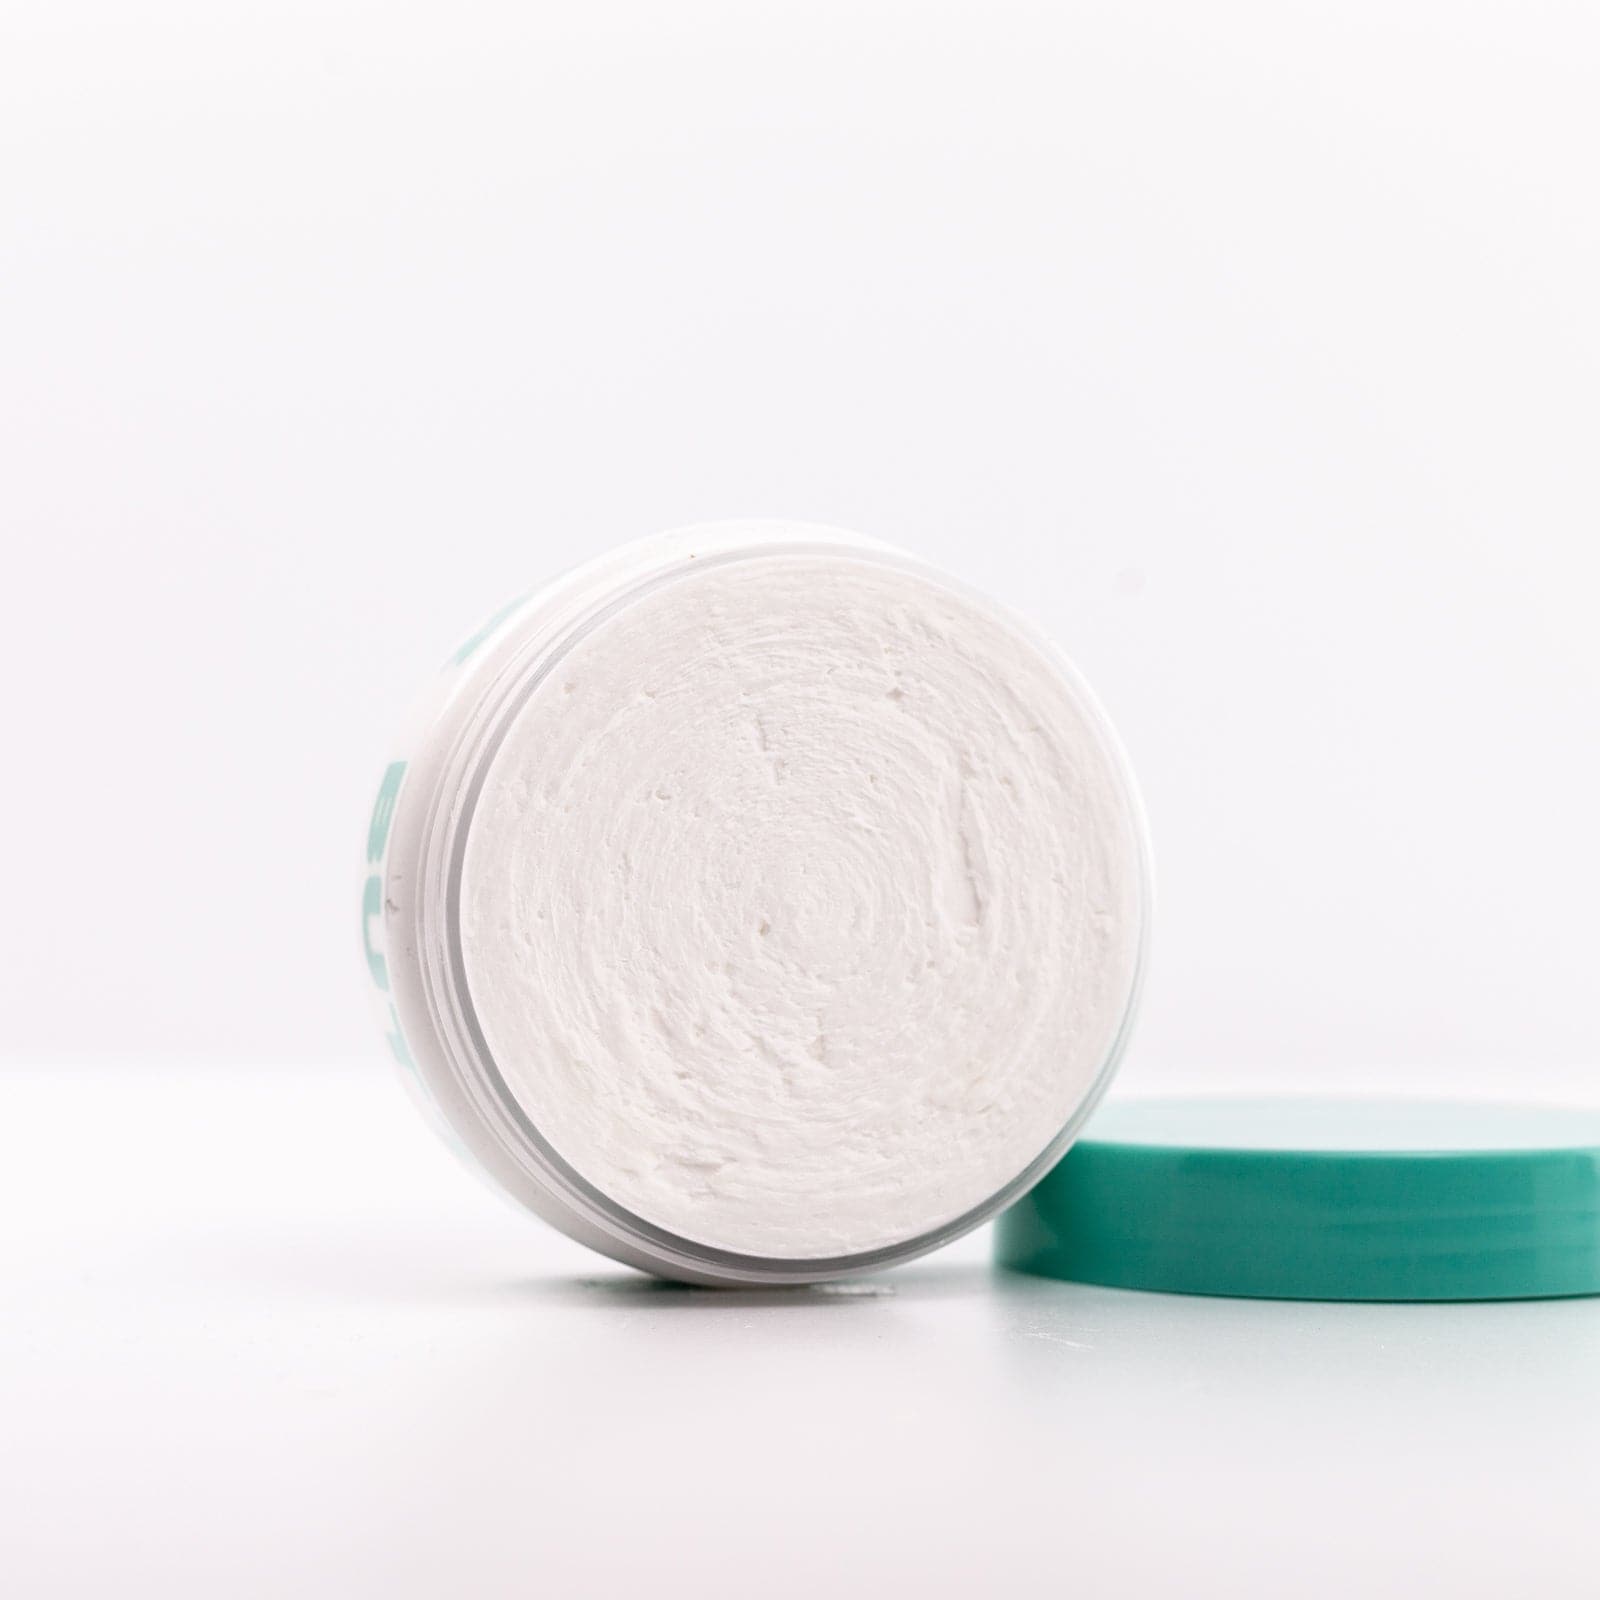 Open container of Body Butter and teal lid 